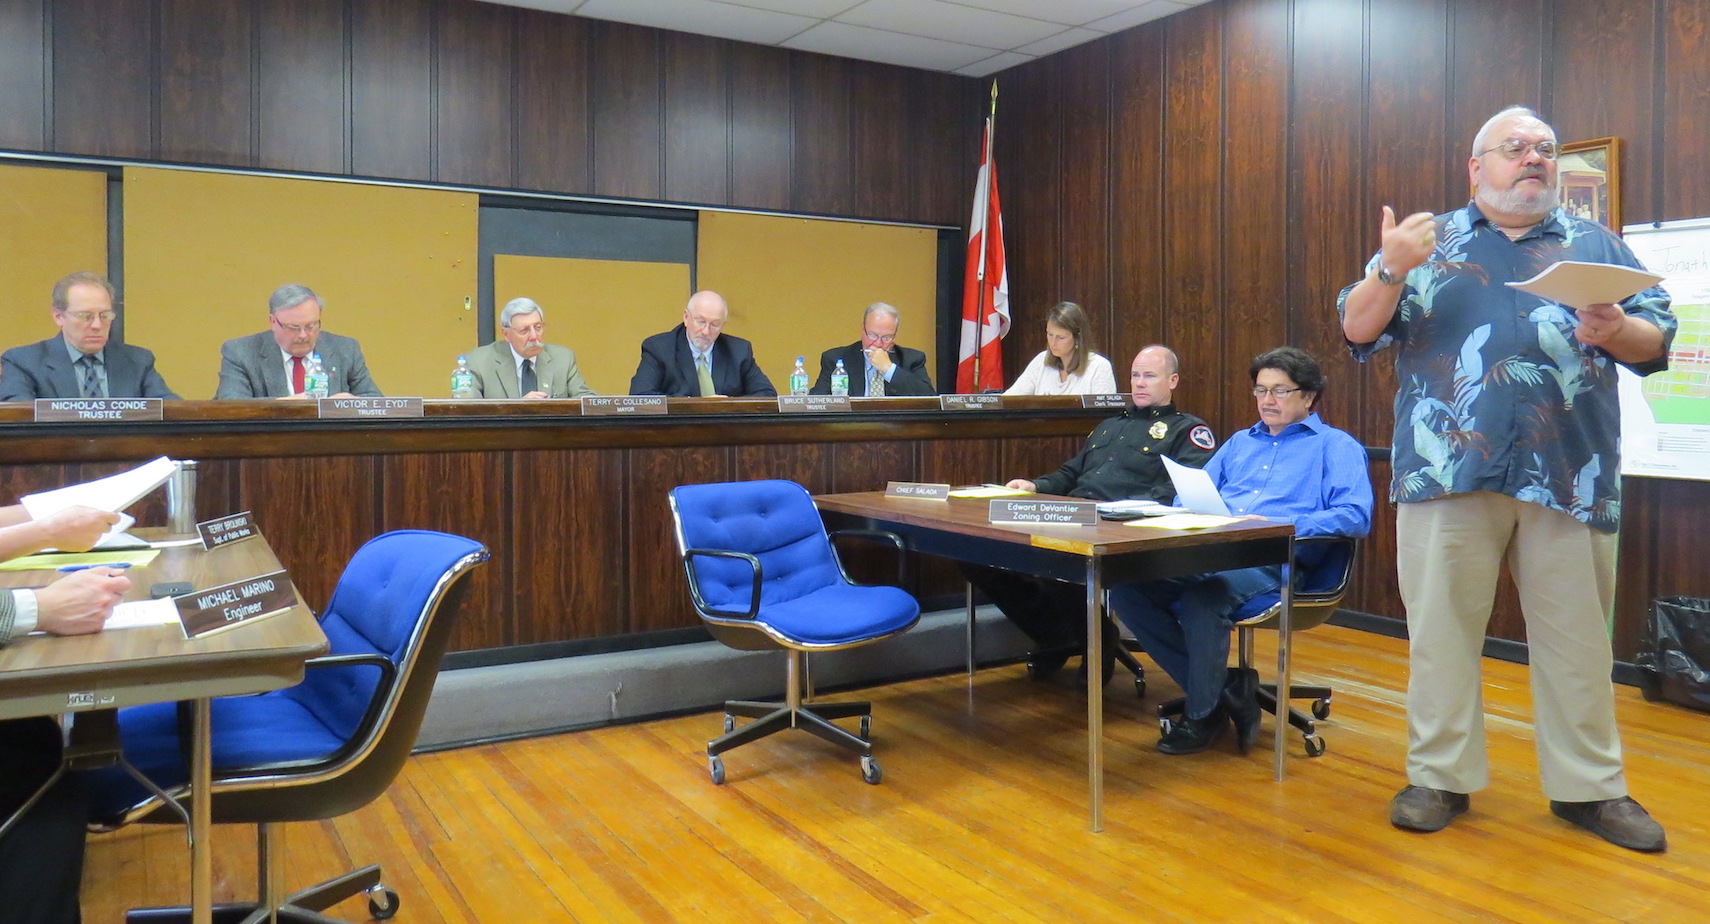 Village of Lewiston Deputy Treasurer Edward Walker discusses the fiscal year 2015-16 budget as trustees look on.